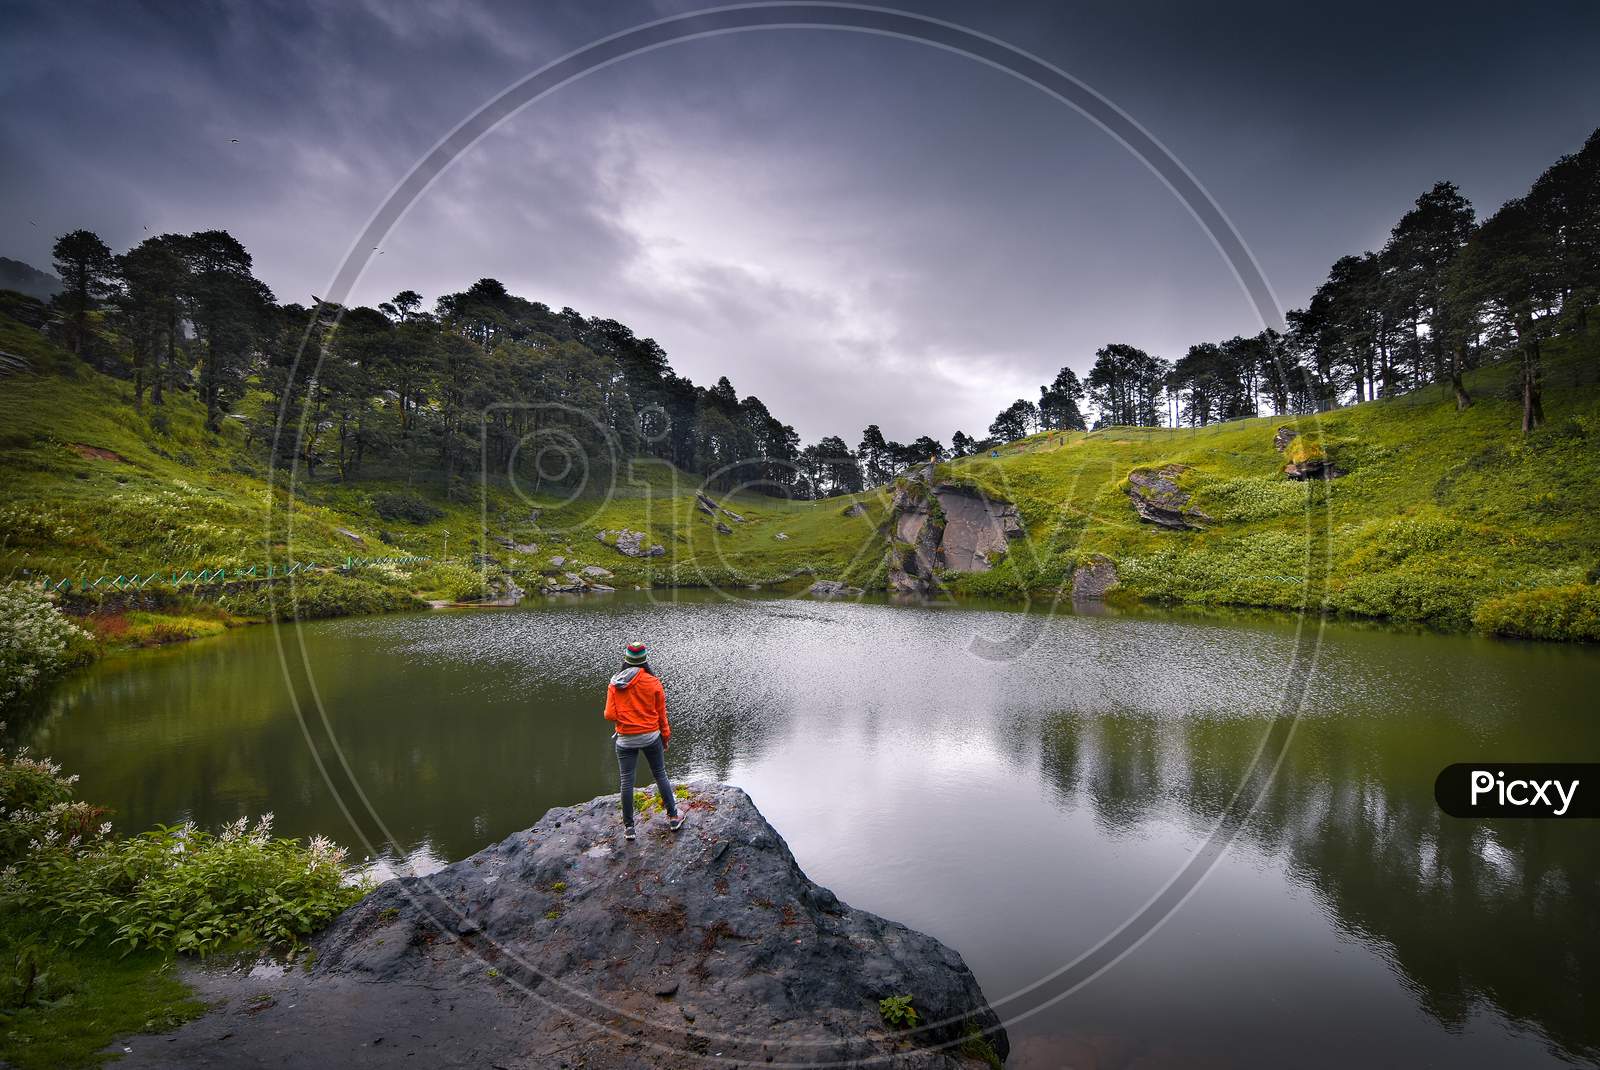 A Landscape Of A Small Lake In Between The Mountain Ranges With A Man Standing Beside It.